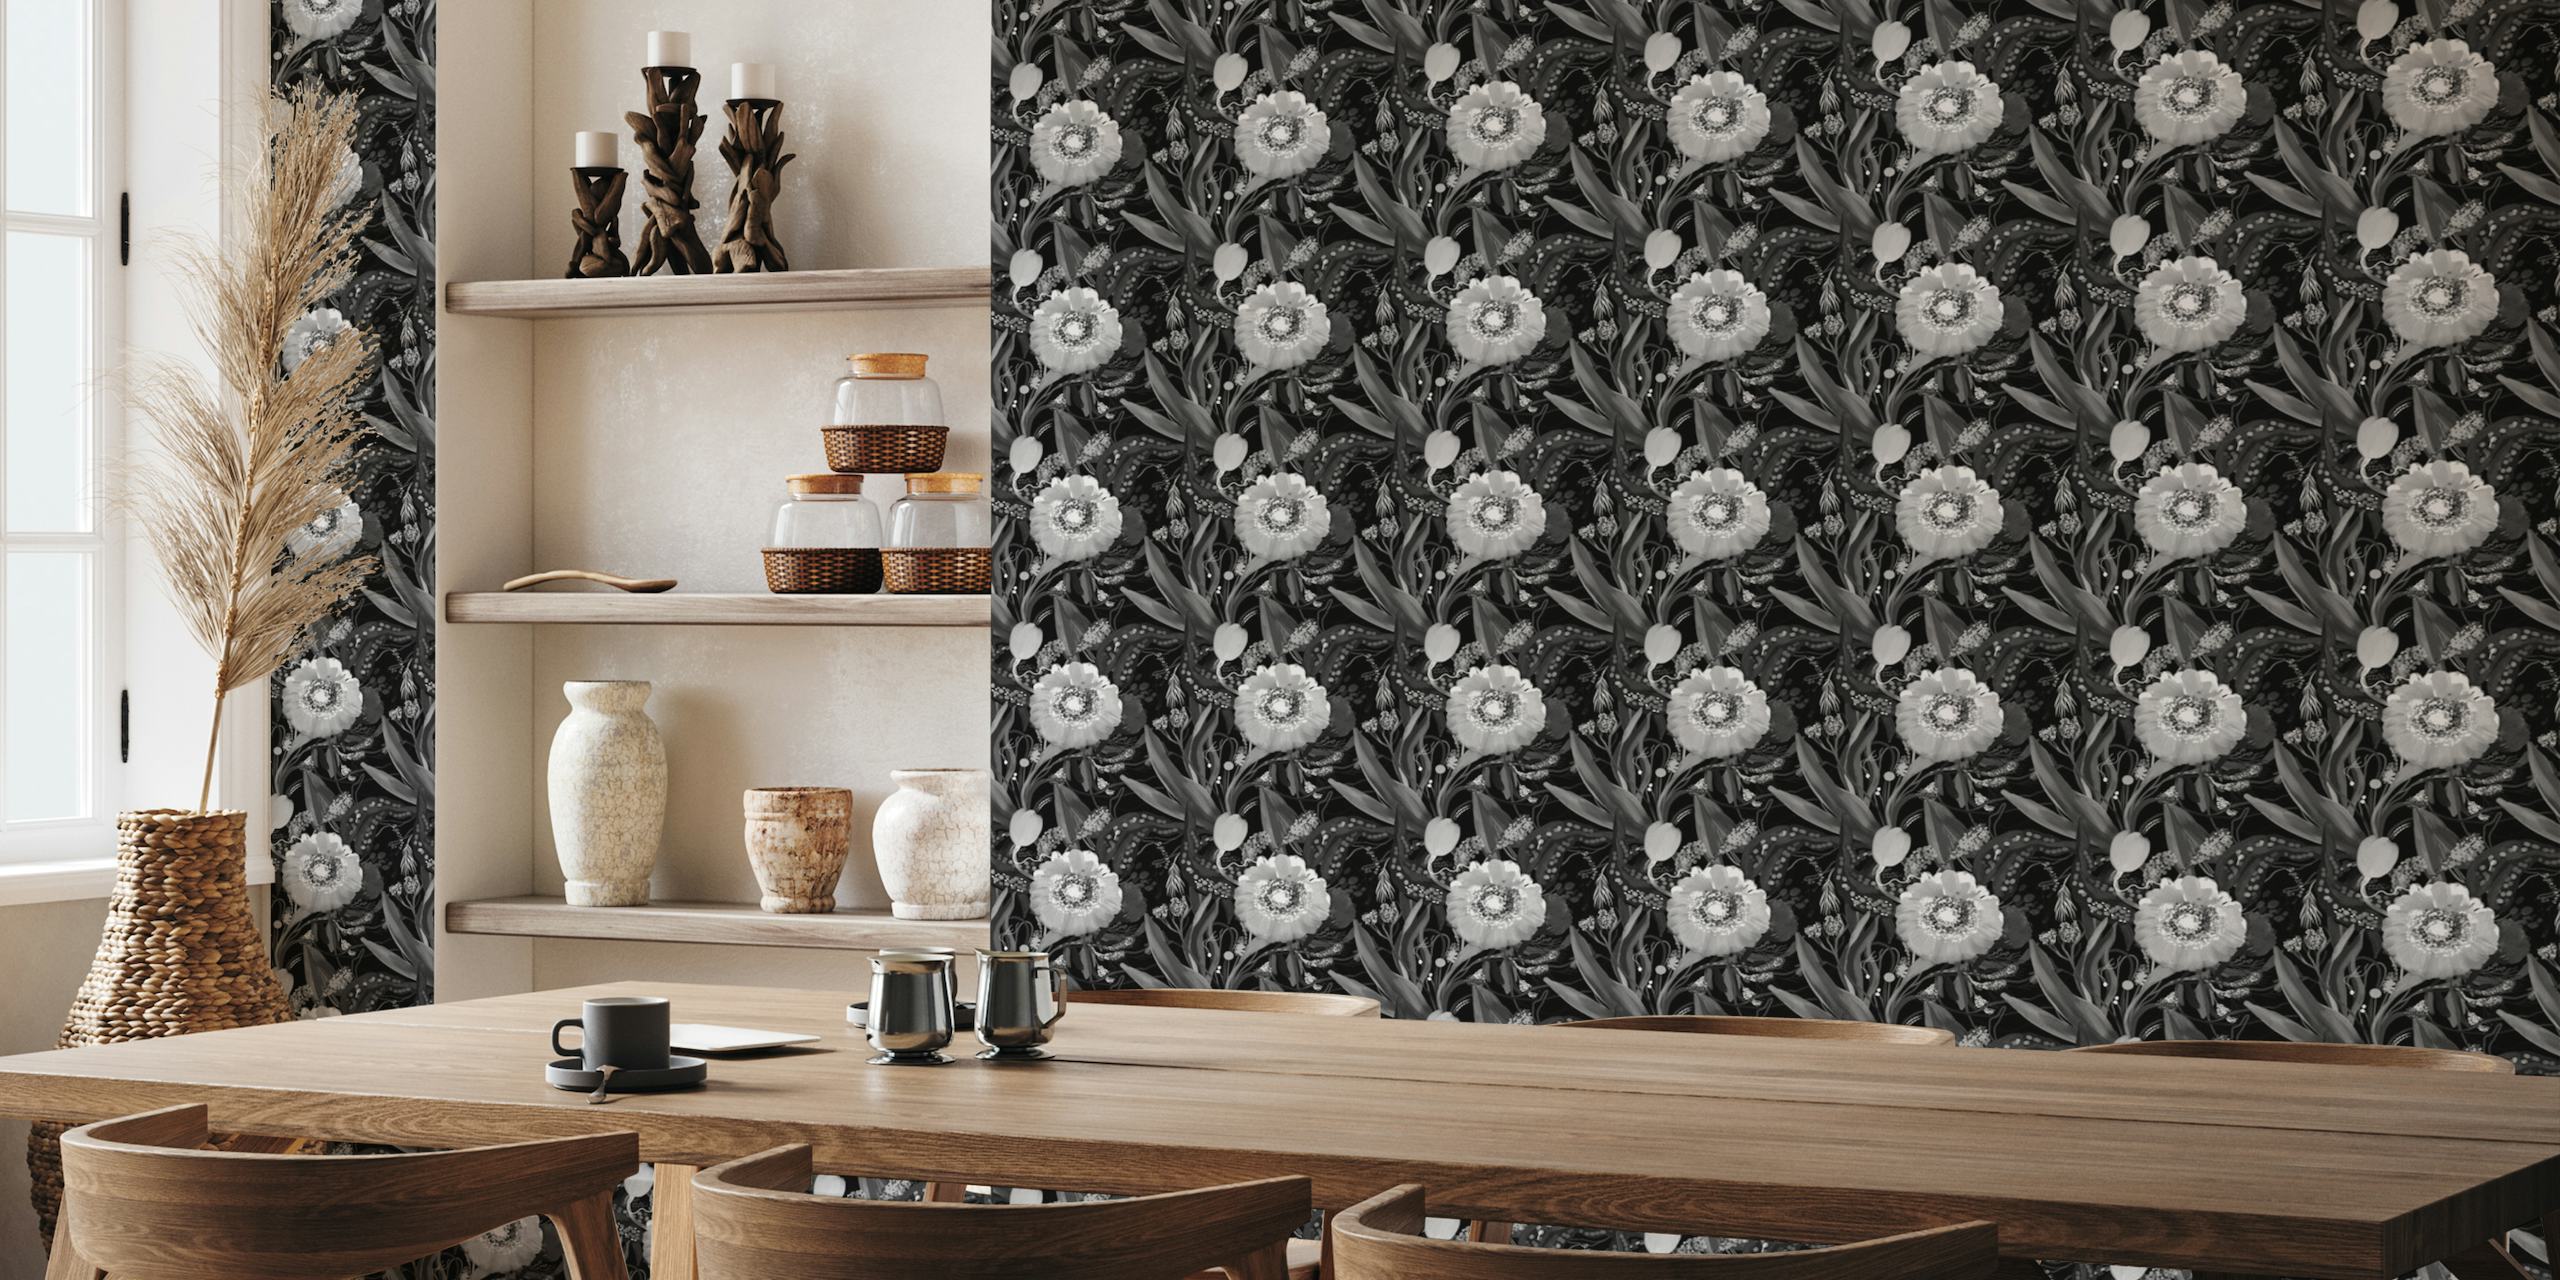 Black and white floral wall mural with white flowers and dark leaves